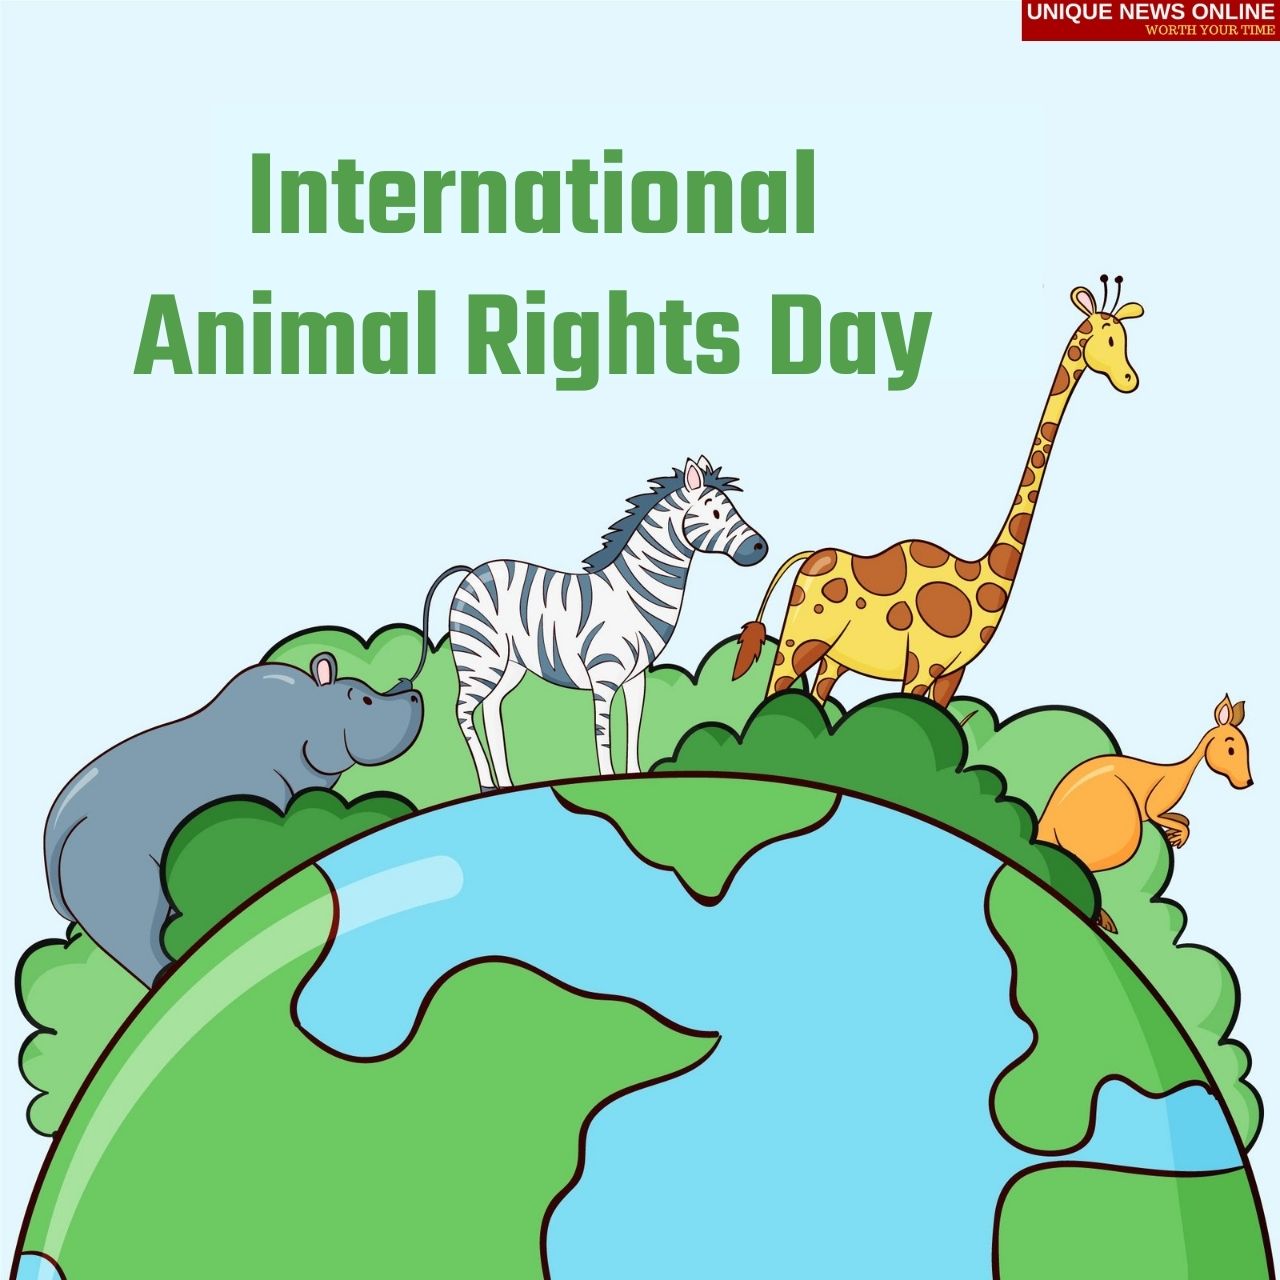 International Animal Rights Day 2021 Quotes, Images, Messages, Slogans